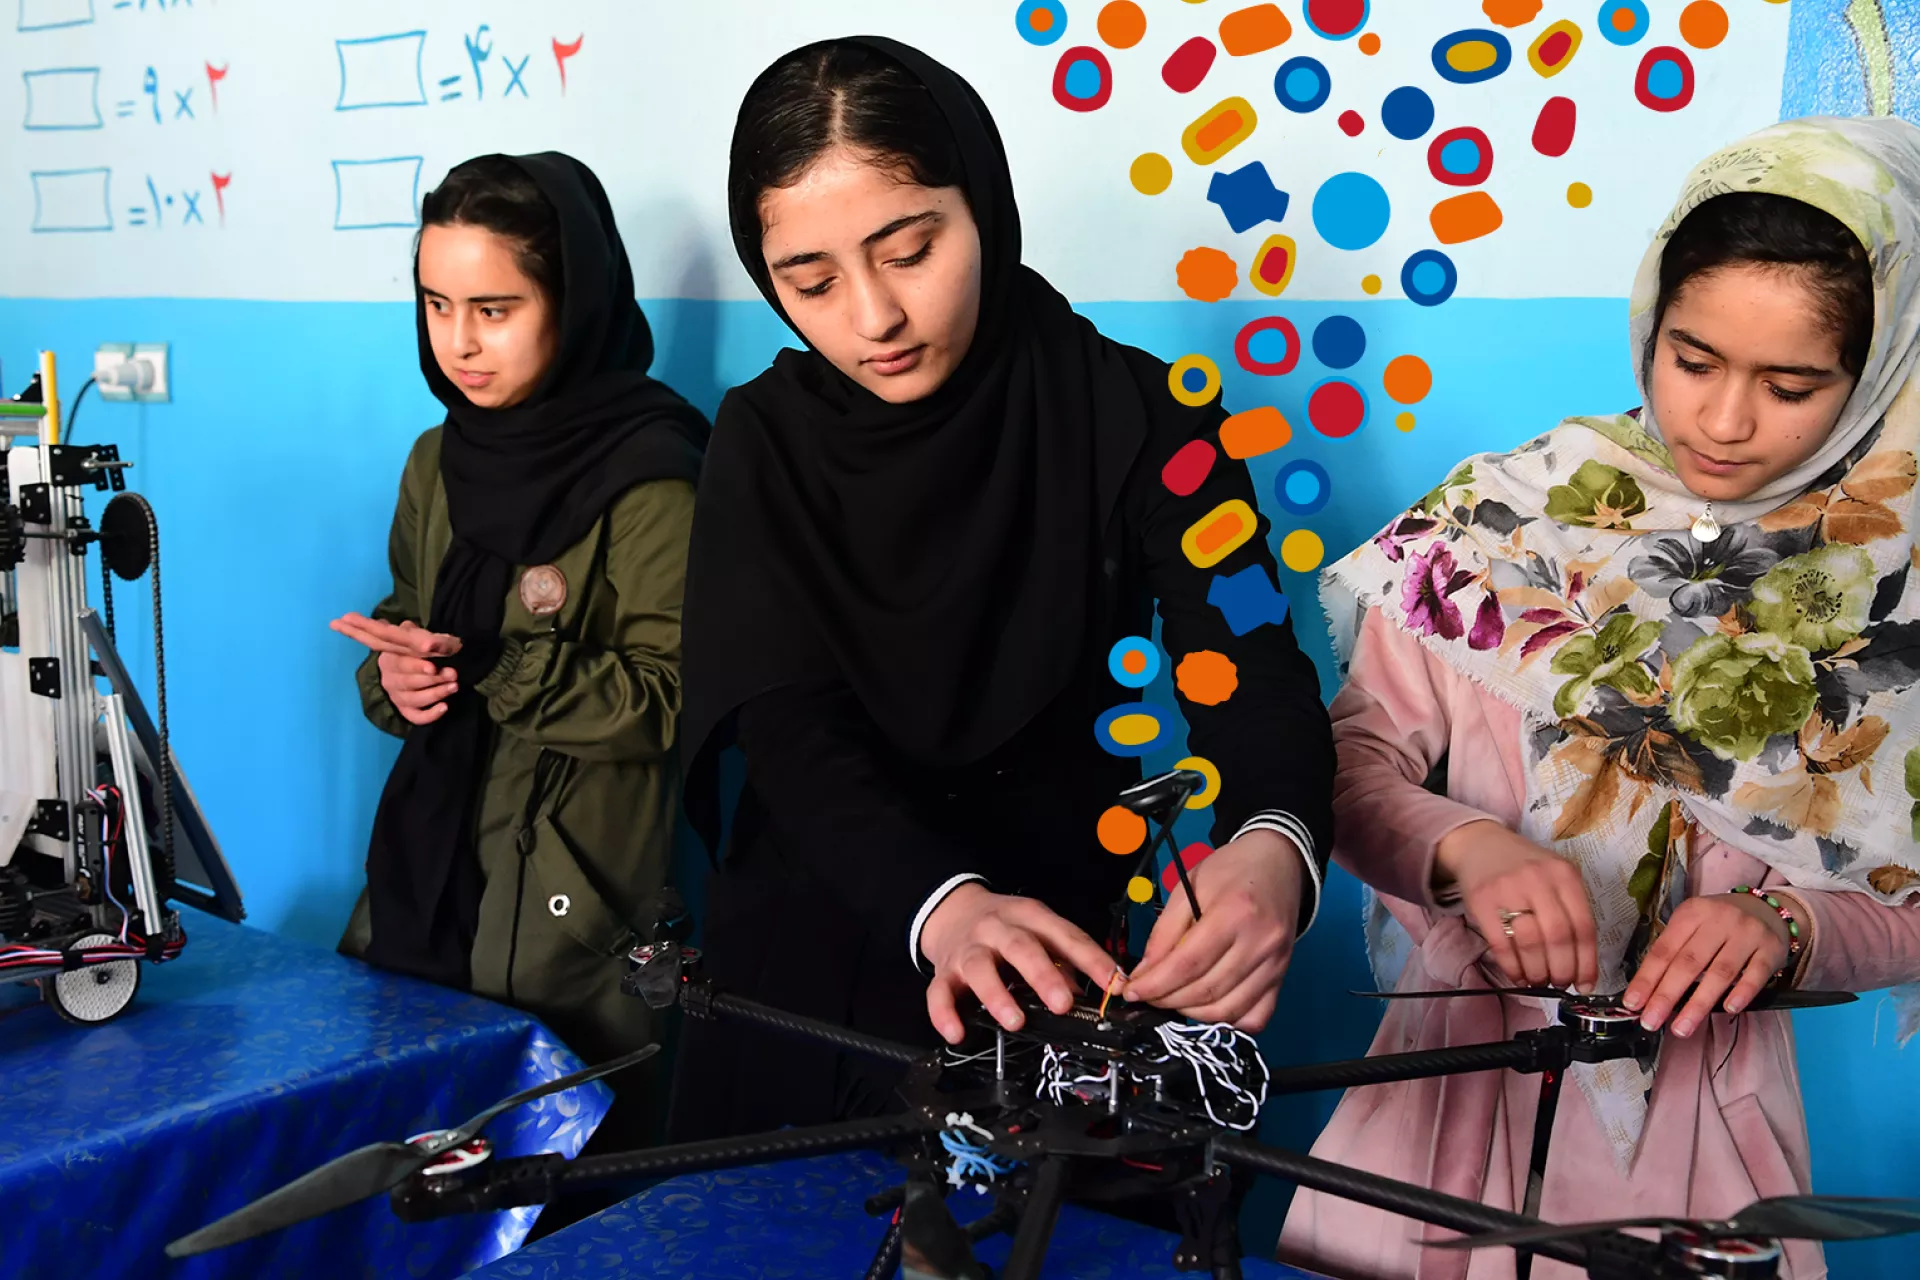 Young girls from Afghanistan who are trained in robotics are depicted tinkering with a drone, with GenU beads superimposed.